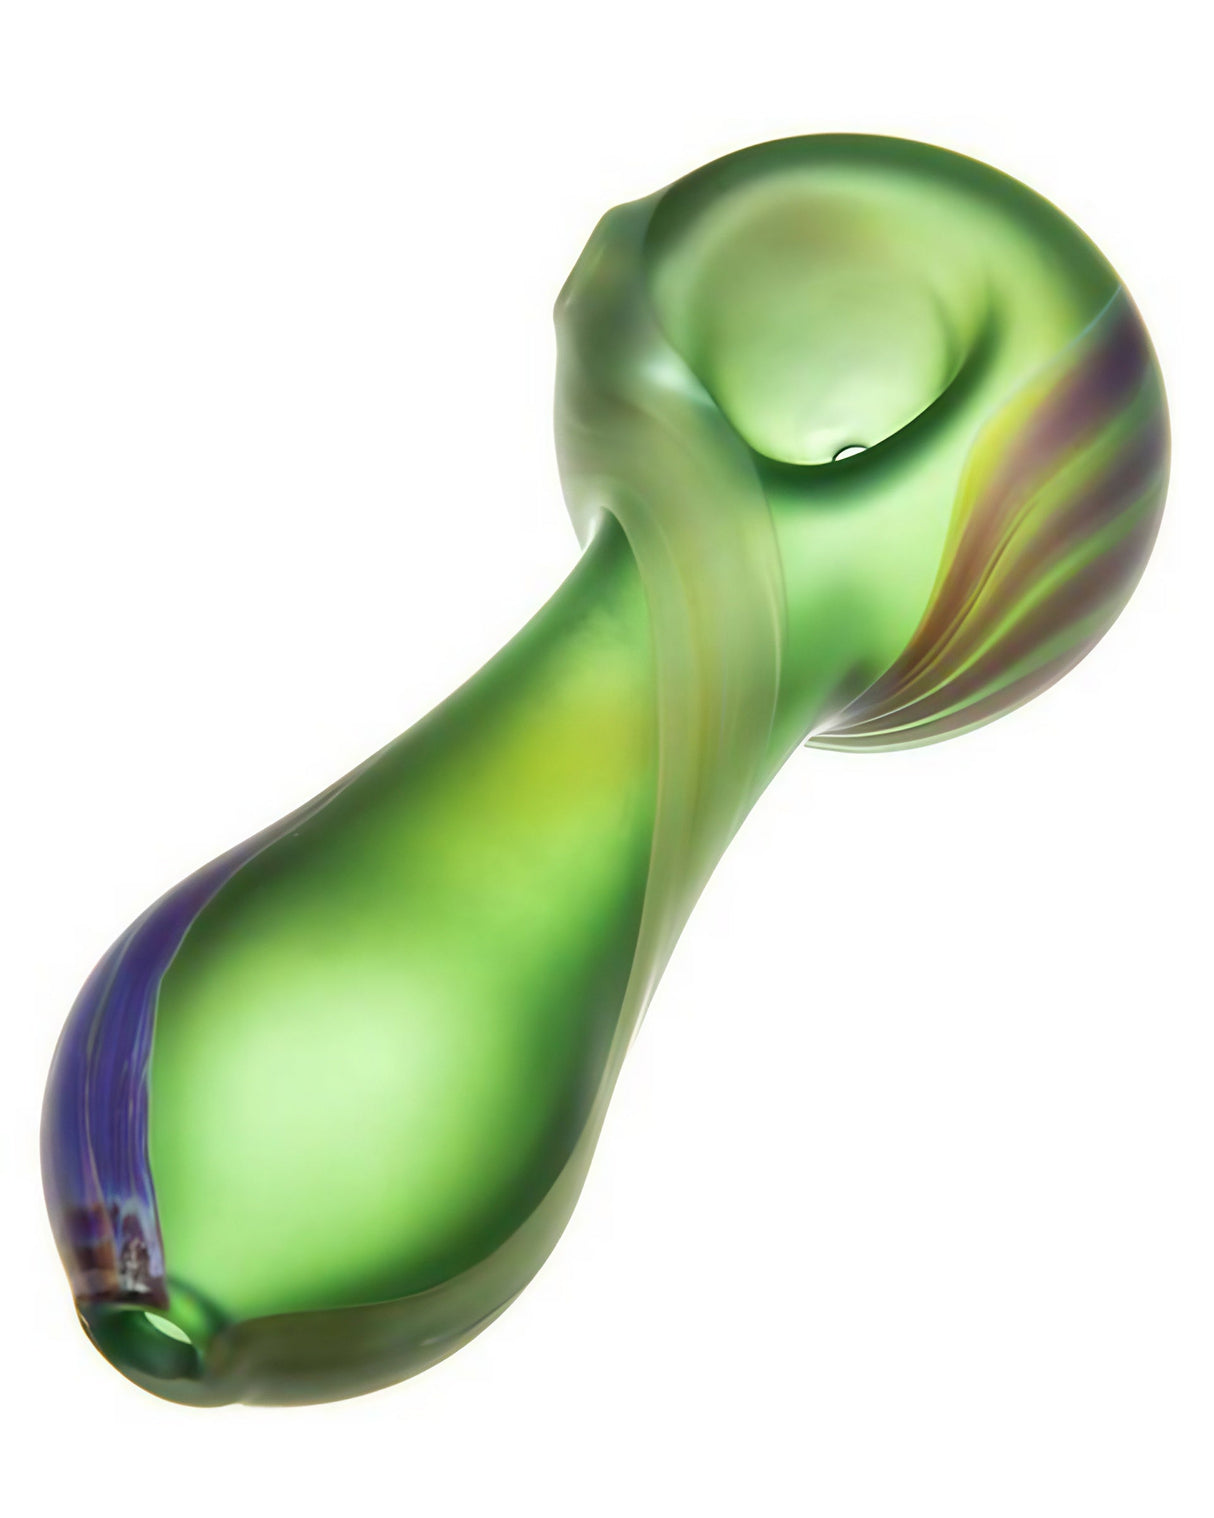 Chameleon Glass Northern Lights Spoon Pipe with Heavy Wall Thickness and Vibrant Design